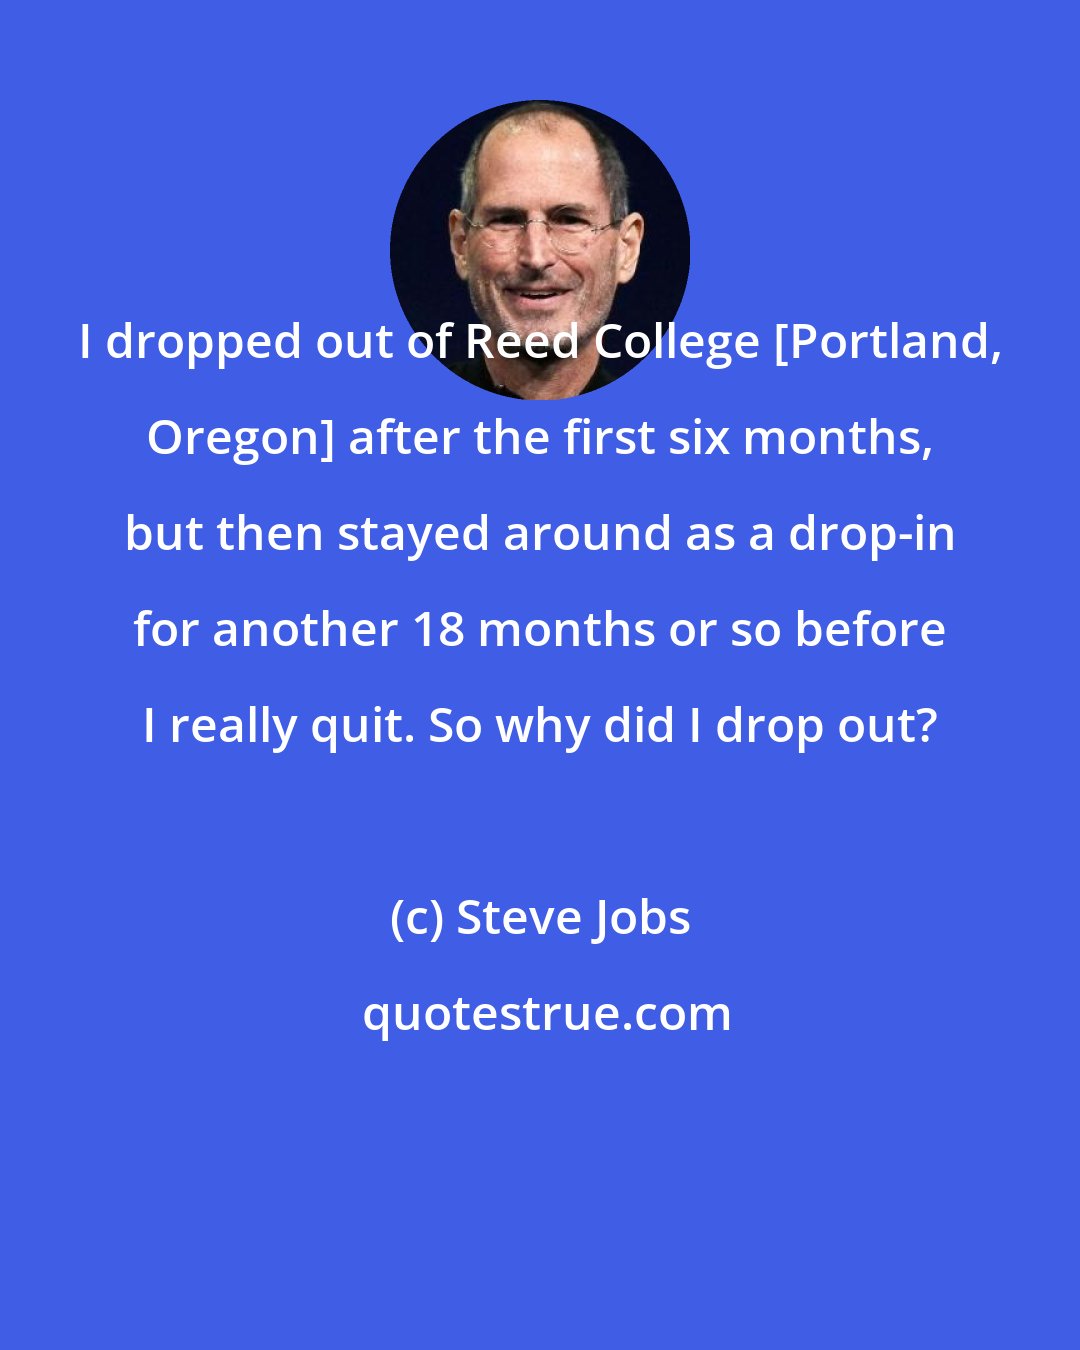 Steve Jobs: I dropped out of Reed College [Portland, Oregon] after the first six months, but then stayed around as a drop-in for another 18 months or so before I really quit. So why did I drop out?